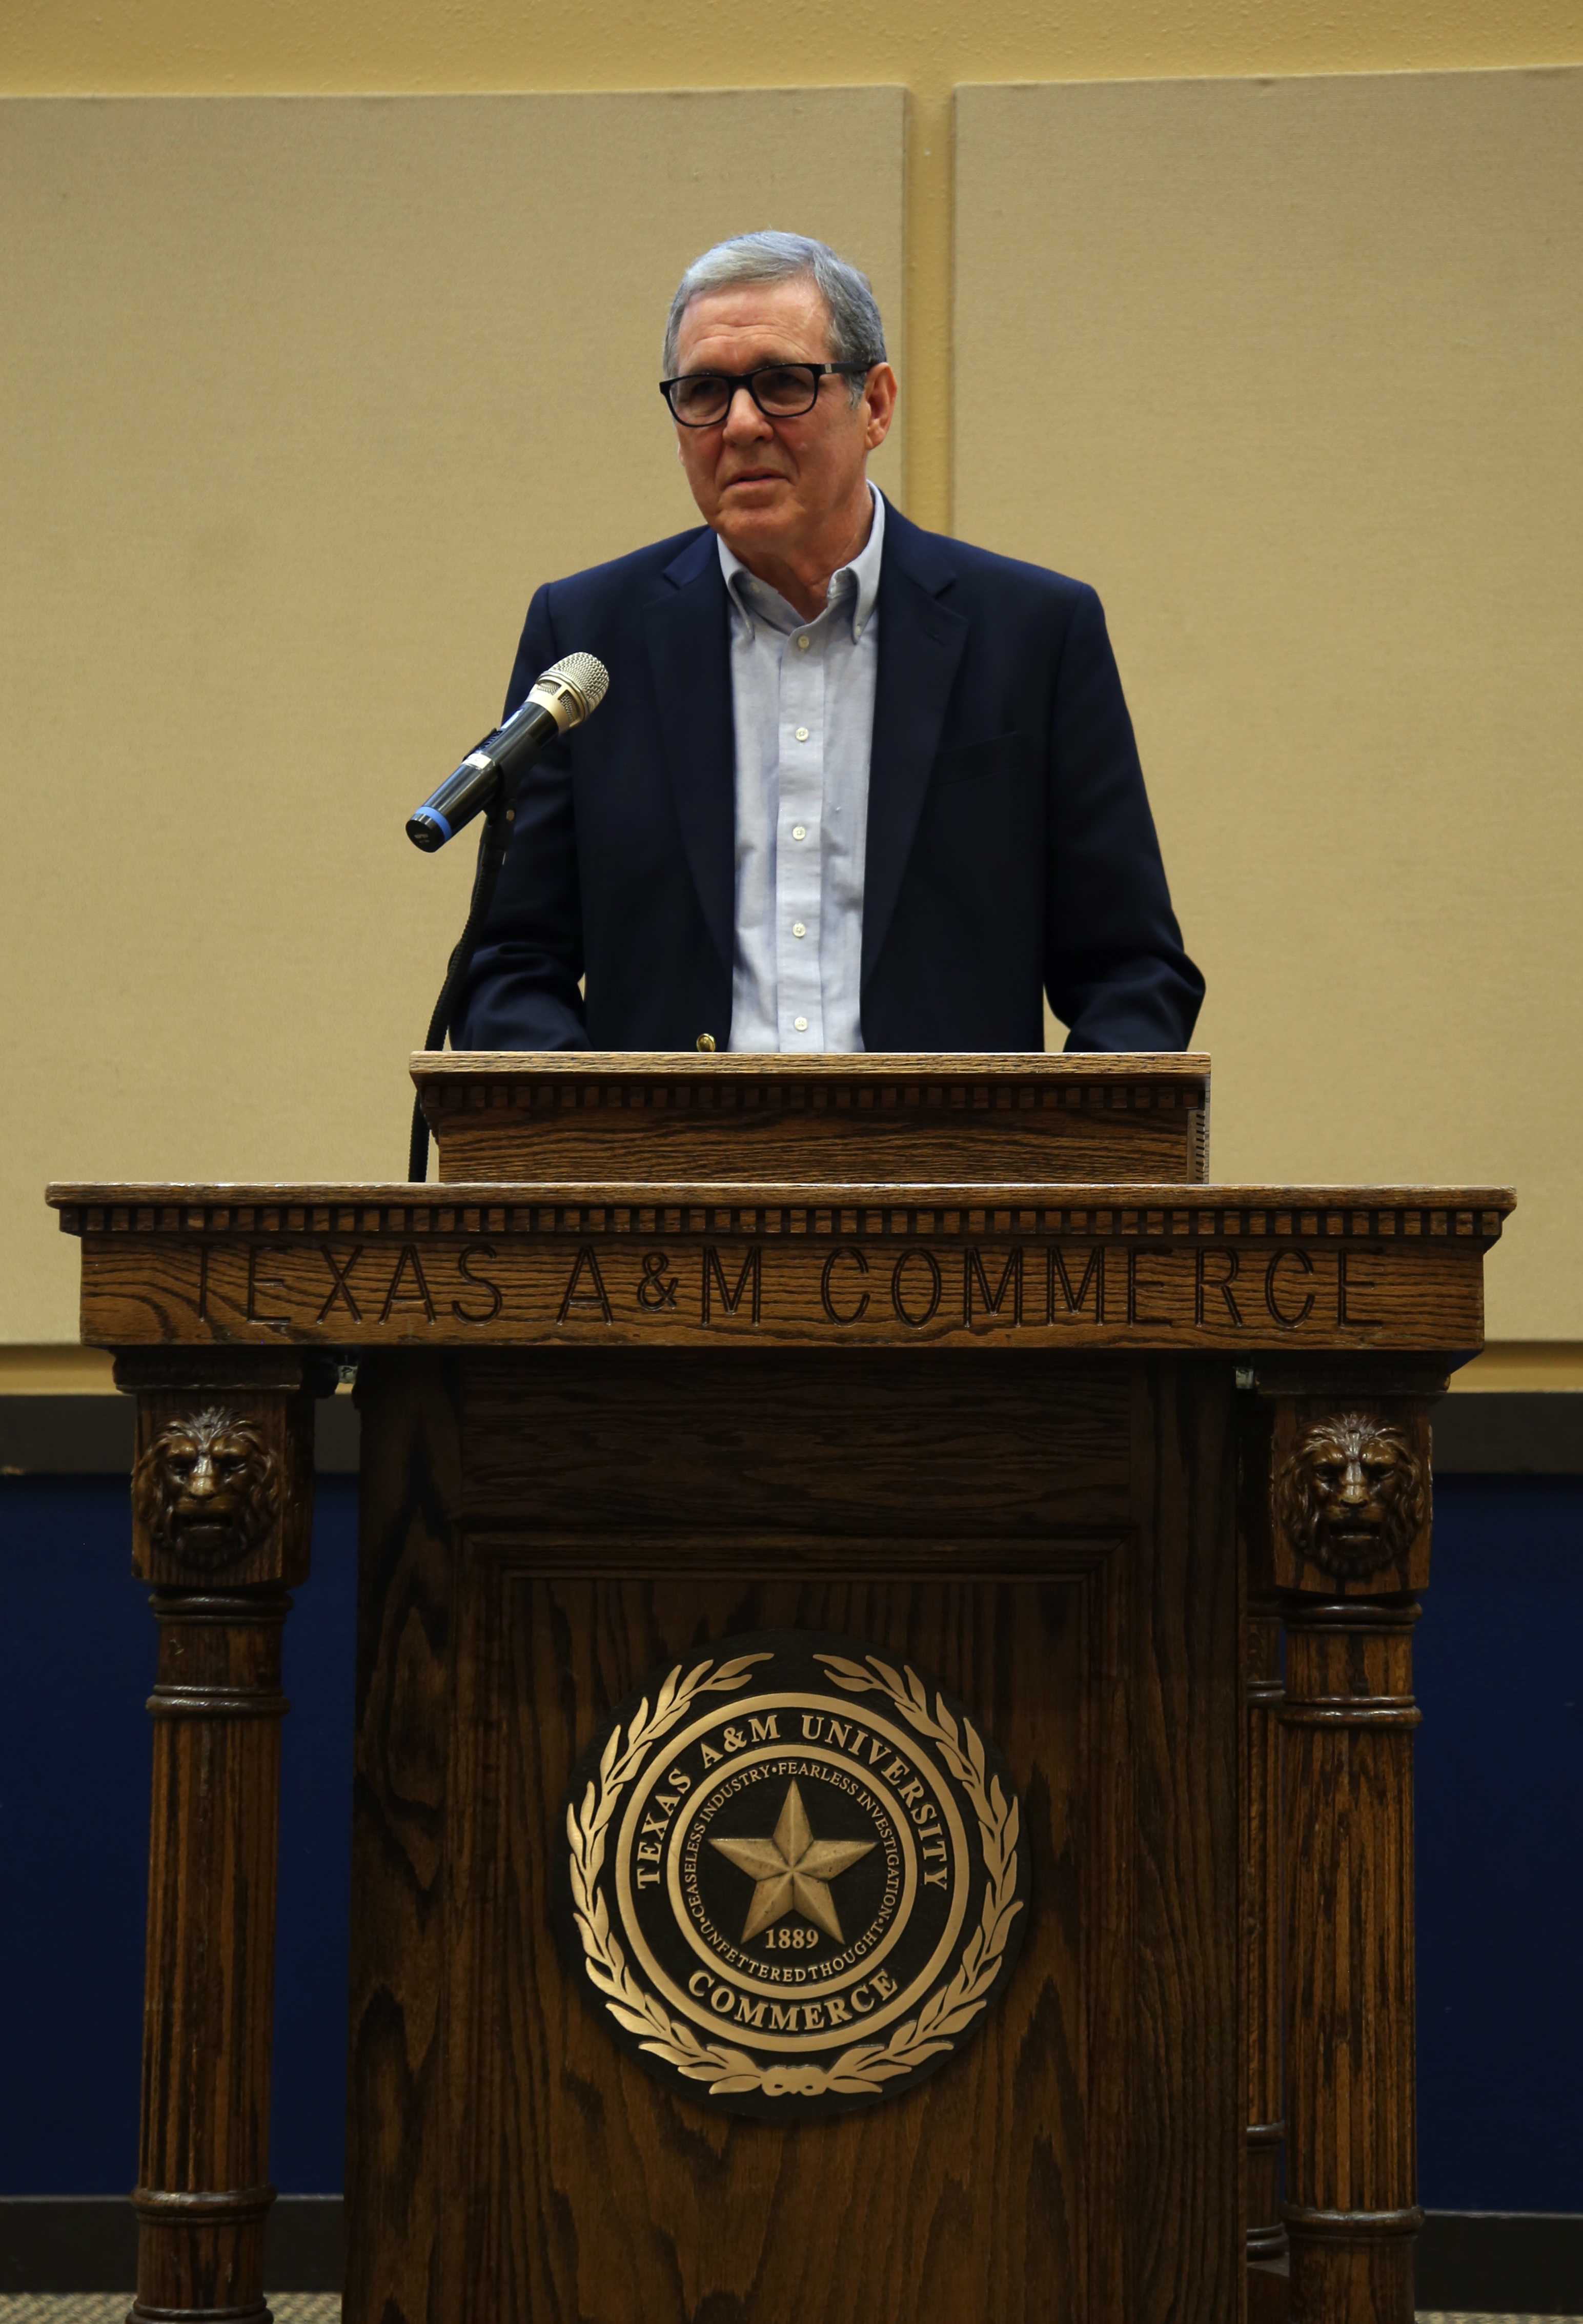  Photo by Eriana Ruiz| John Neal, professor emeritus, speaks at the Texas Community College Journalism Association Convention Oct. 12 after being inducted into the TCCJA Hall of Honor; Neal